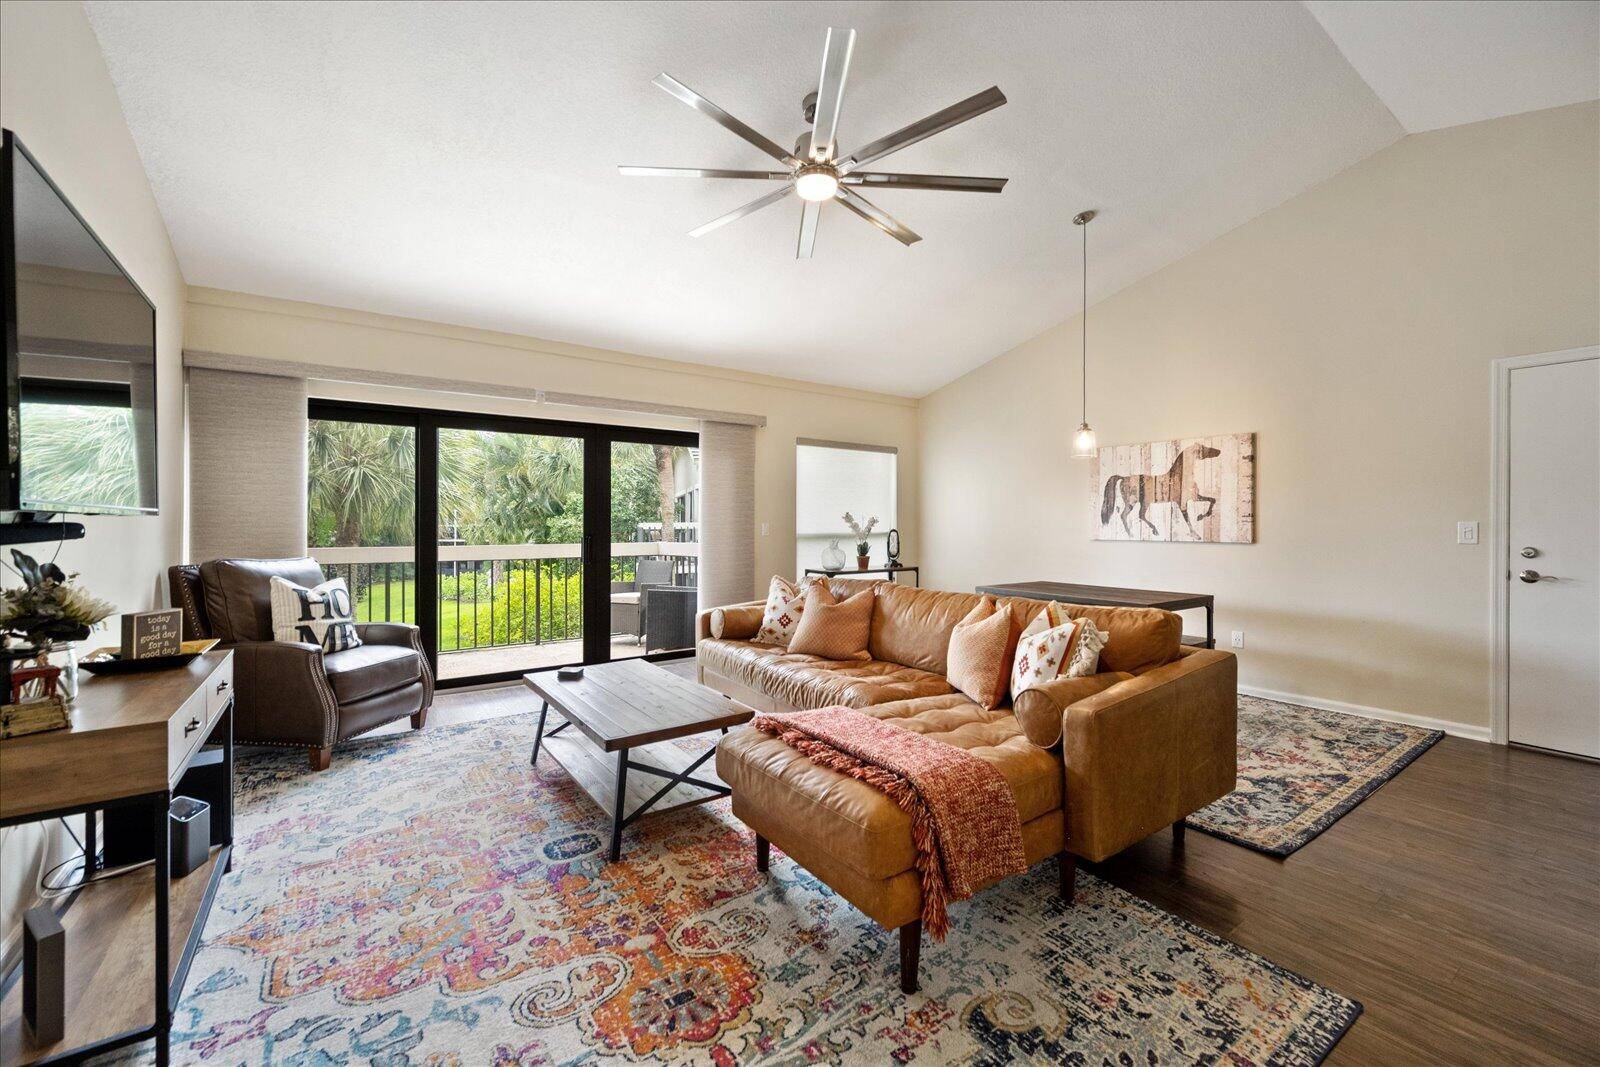 Discover refined living in this one bedroom, one bathroom apartment located in the Palm Beach Polo and Country Club, available for off seasonal rent.